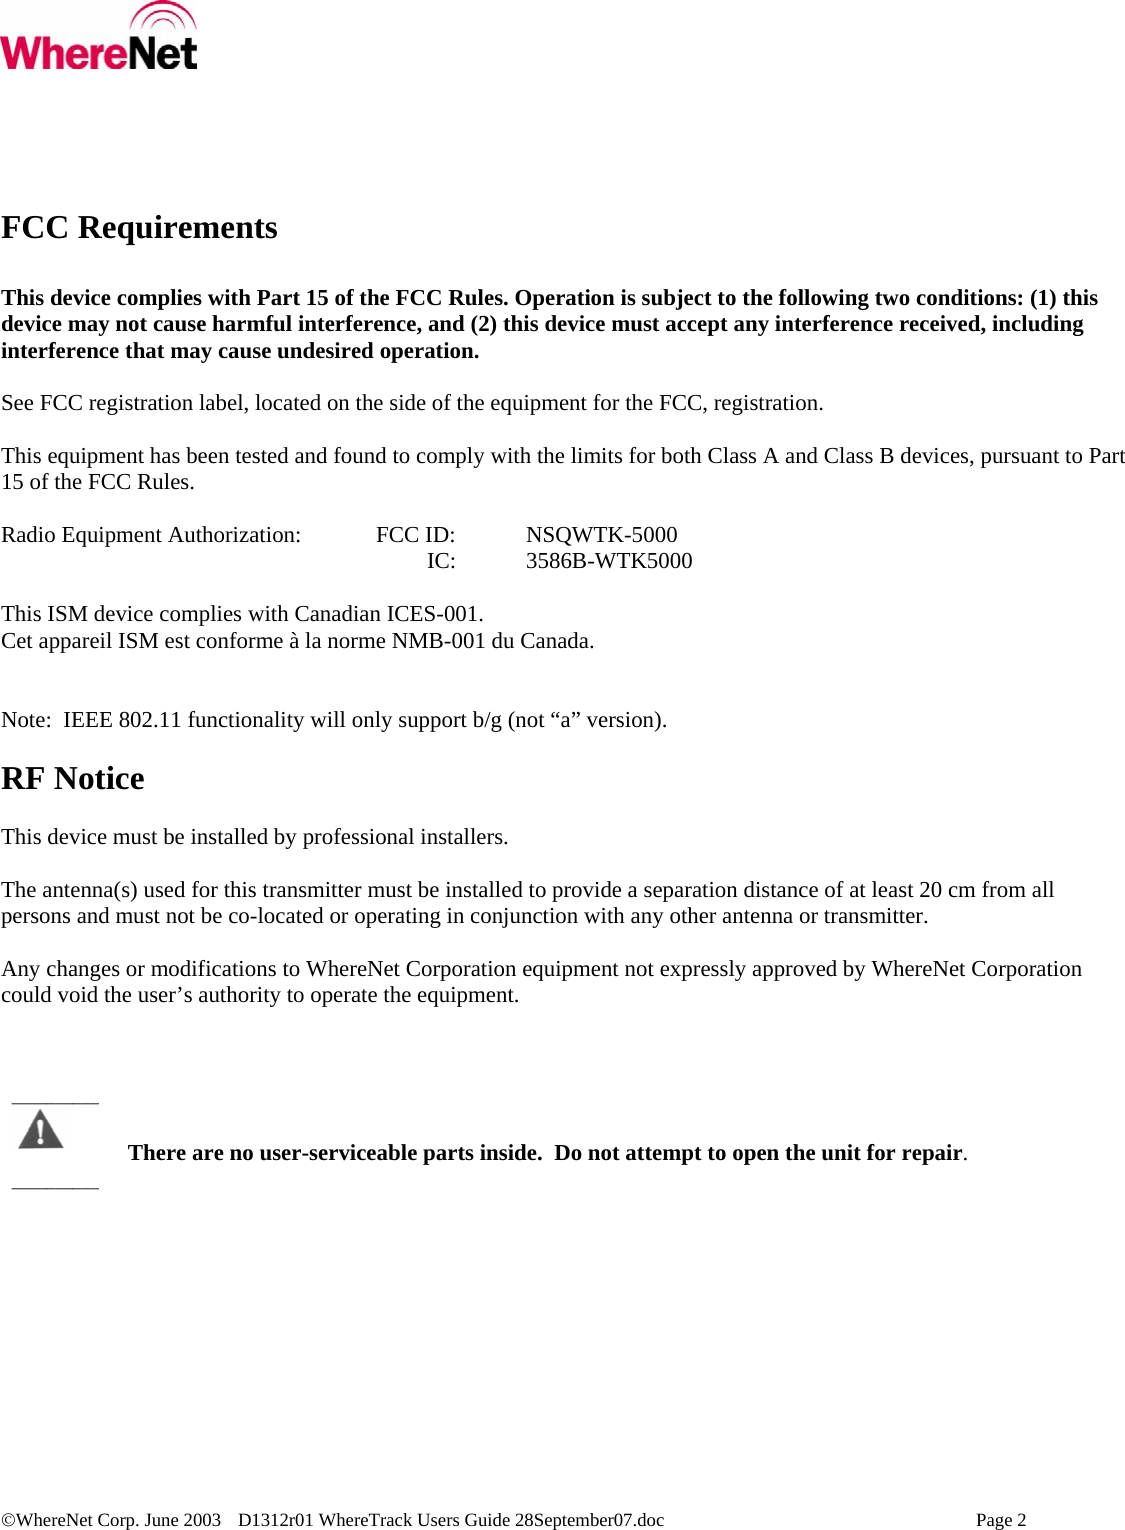  ©WhereNet Corp. June 2003  D1312r01 WhereTrack Users Guide 28September07.doc    Page 2  FCC Requirements  This device complies with Part 15 of the FCC Rules. Operation is subject to the following two conditions: (1) this device may not cause harmful interference, and (2) this device must accept any interference received, including interference that may cause undesired operation.  See FCC registration label, located on the side of the equipment for the FCC, registration.  This equipment has been tested and found to comply with the limits for both Class A and Class B devices, pursuant to Part 15 of the FCC Rules.  Radio Equipment Authorization:  FCC ID:  NSQWTK-5000                               IC:  3586B-WTK5000  This ISM device complies with Canadian ICES-001. Cet appareil ISM est conforme à la norme NMB-001 du Canada.   Note:  IEEE 802.11 functionality will only support b/g (not “a” version).  RF Notice  This device must be installed by professional installers.    The antenna(s) used for this transmitter must be installed to provide a separation distance of at least 20 cm from all persons and must not be co-located or operating in conjunction with any other antenna or transmitter.  Any changes or modifications to WhereNet Corporation equipment not expressly approved by WhereNet Corporation could void the user’s authority to operate the equipment.      There are no user-serviceable parts inside.  Do not attempt to open the unit for repair. ____________________